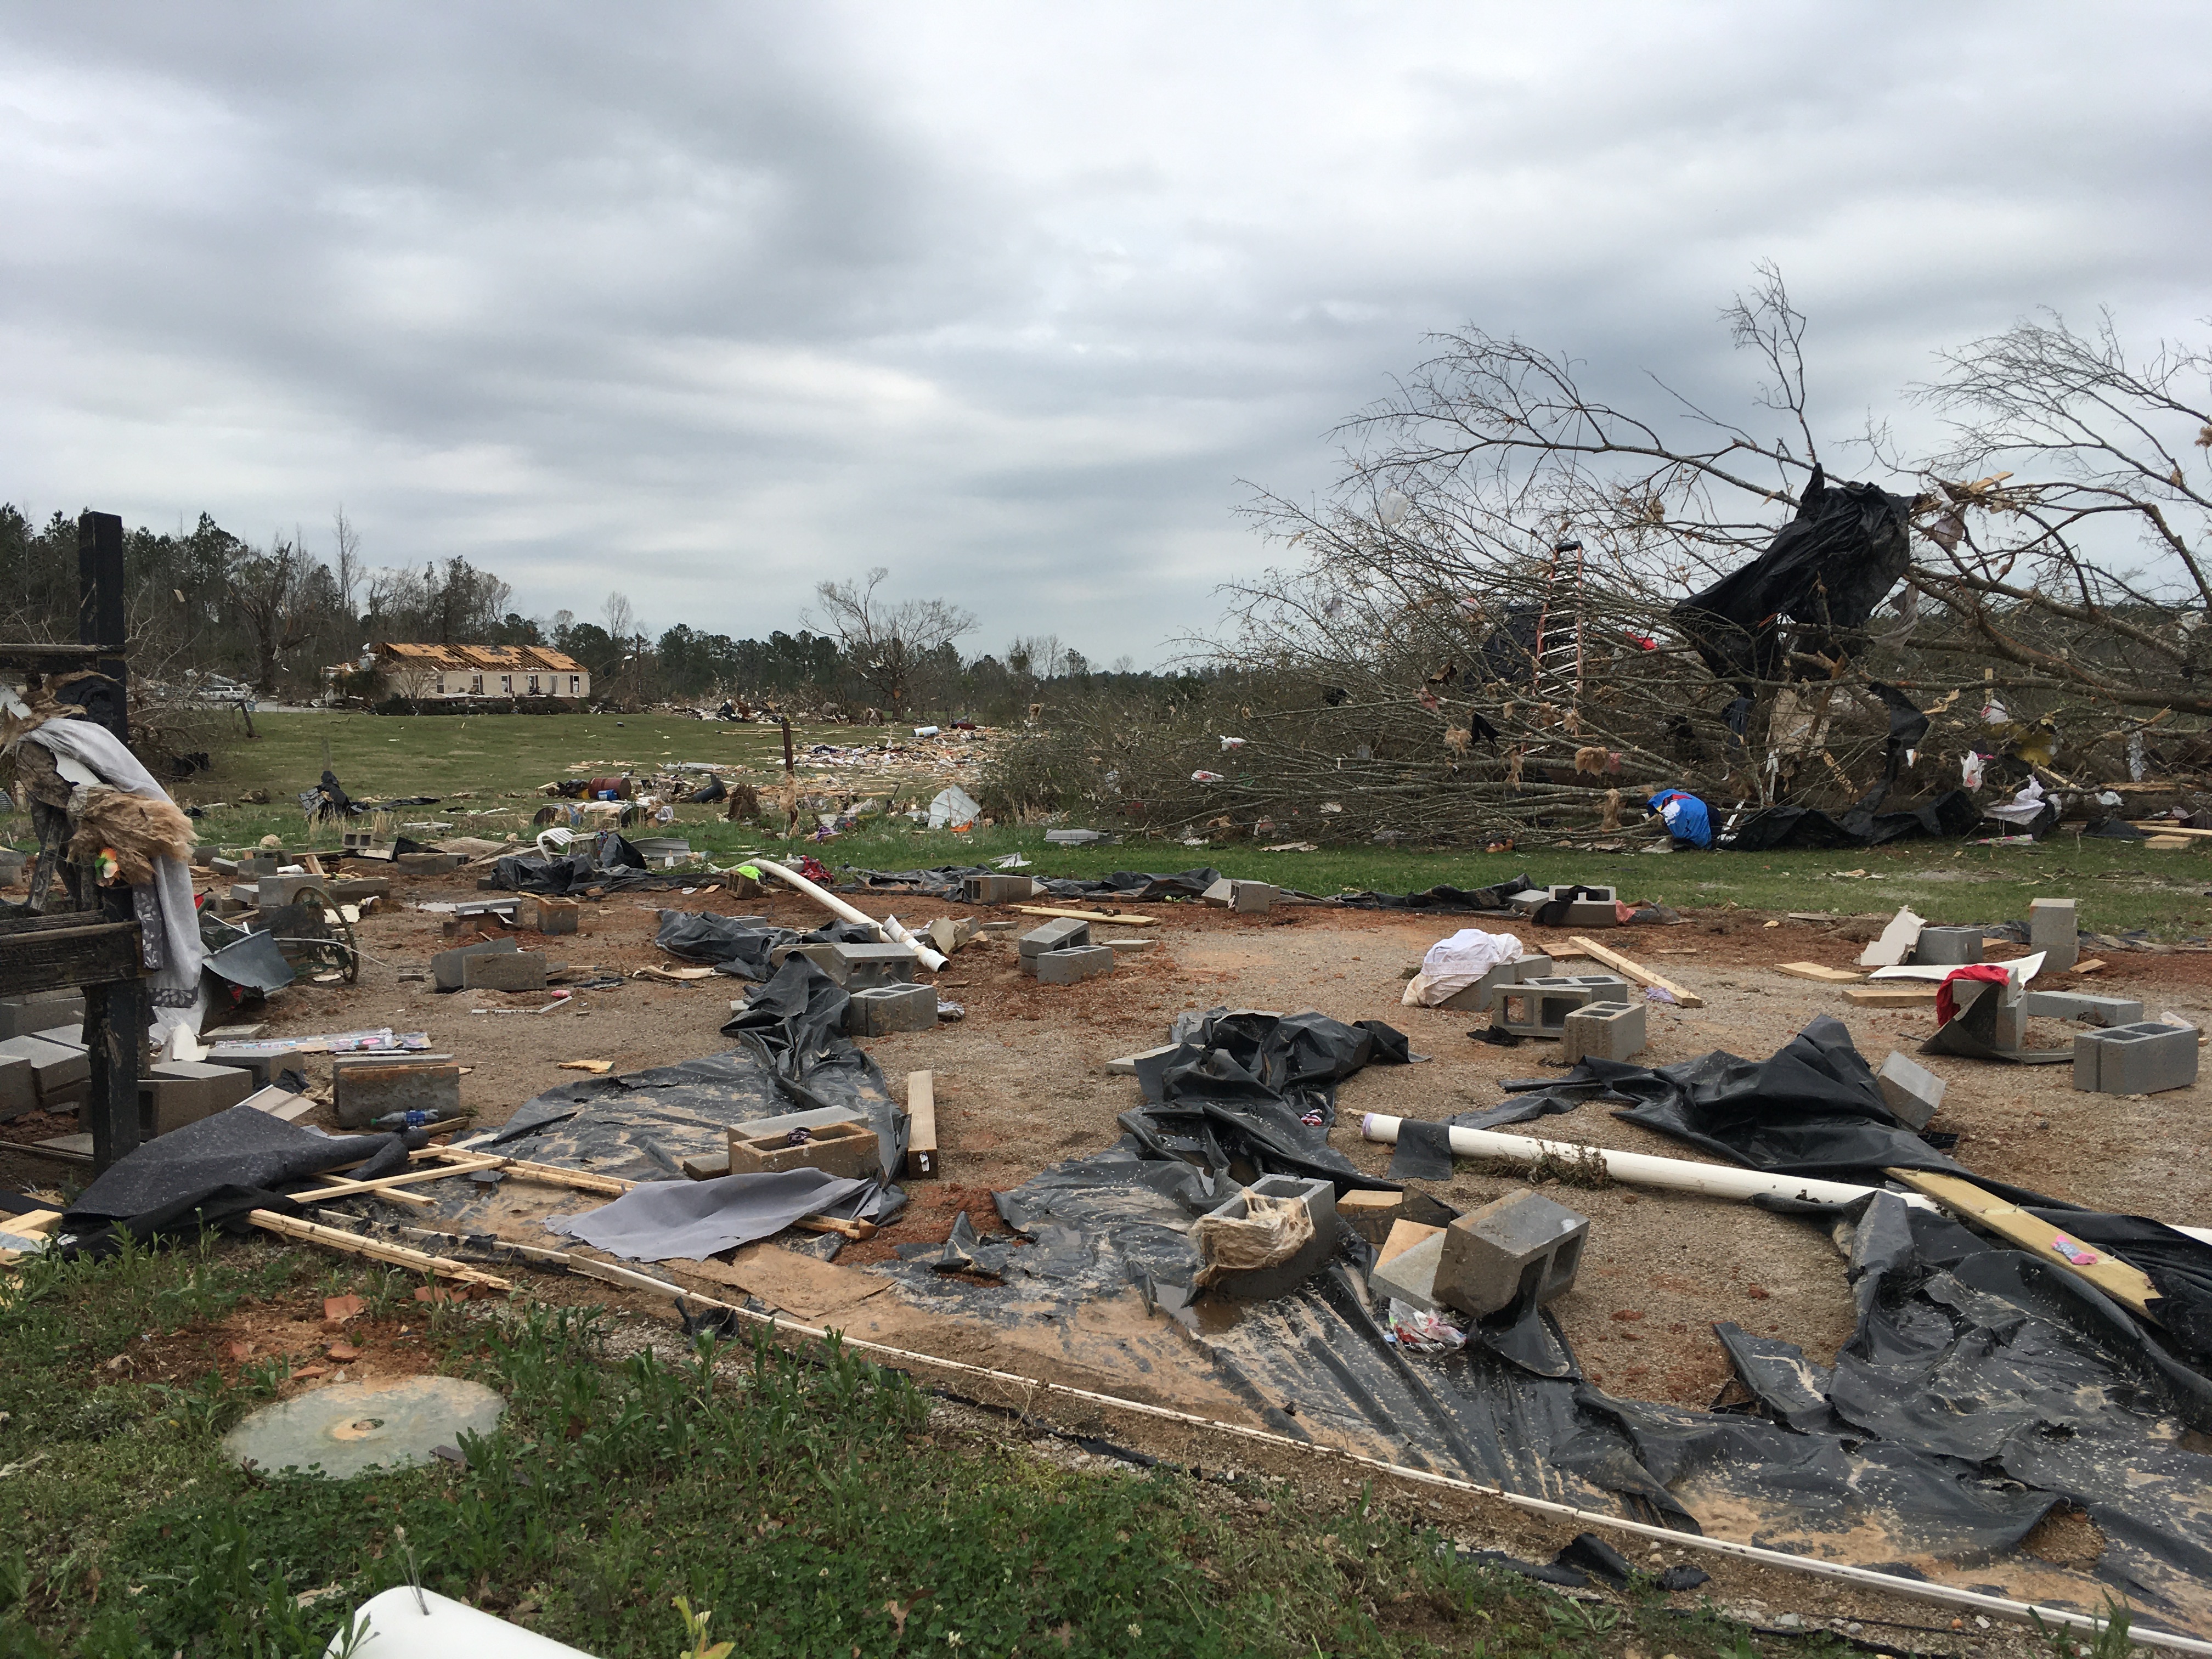 A home that was destroyed at EF2 intensity near Ashby, AL caused by the EF3 Sawyerville tornado. EF1 damage to homes can also be seen.